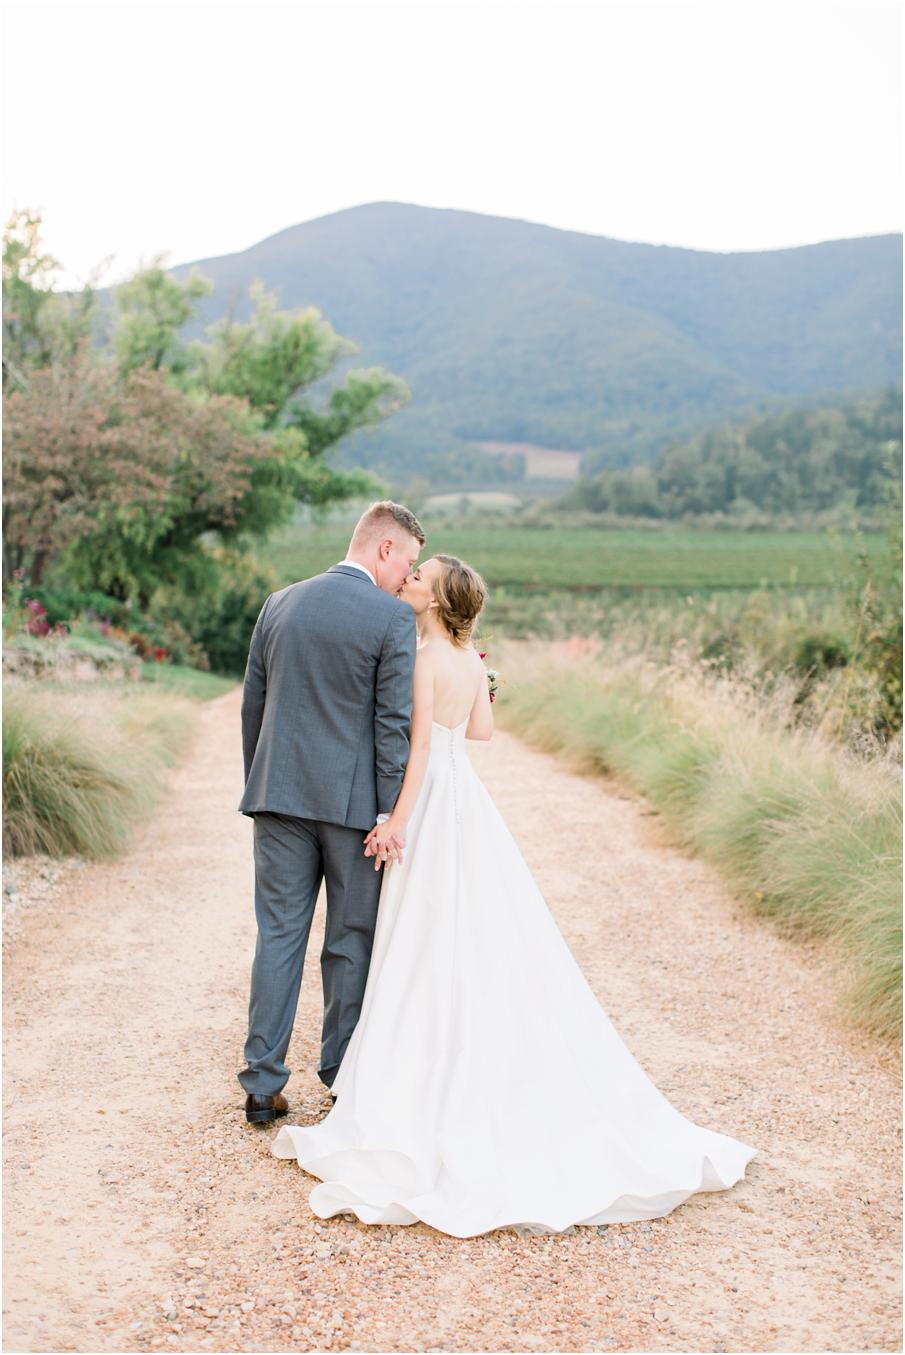 Bride and groom wedding portrait with a gravel road, mountain backdrop and beautiful florals. Pharsalia is one of the best mountain wedding venues in Virginia